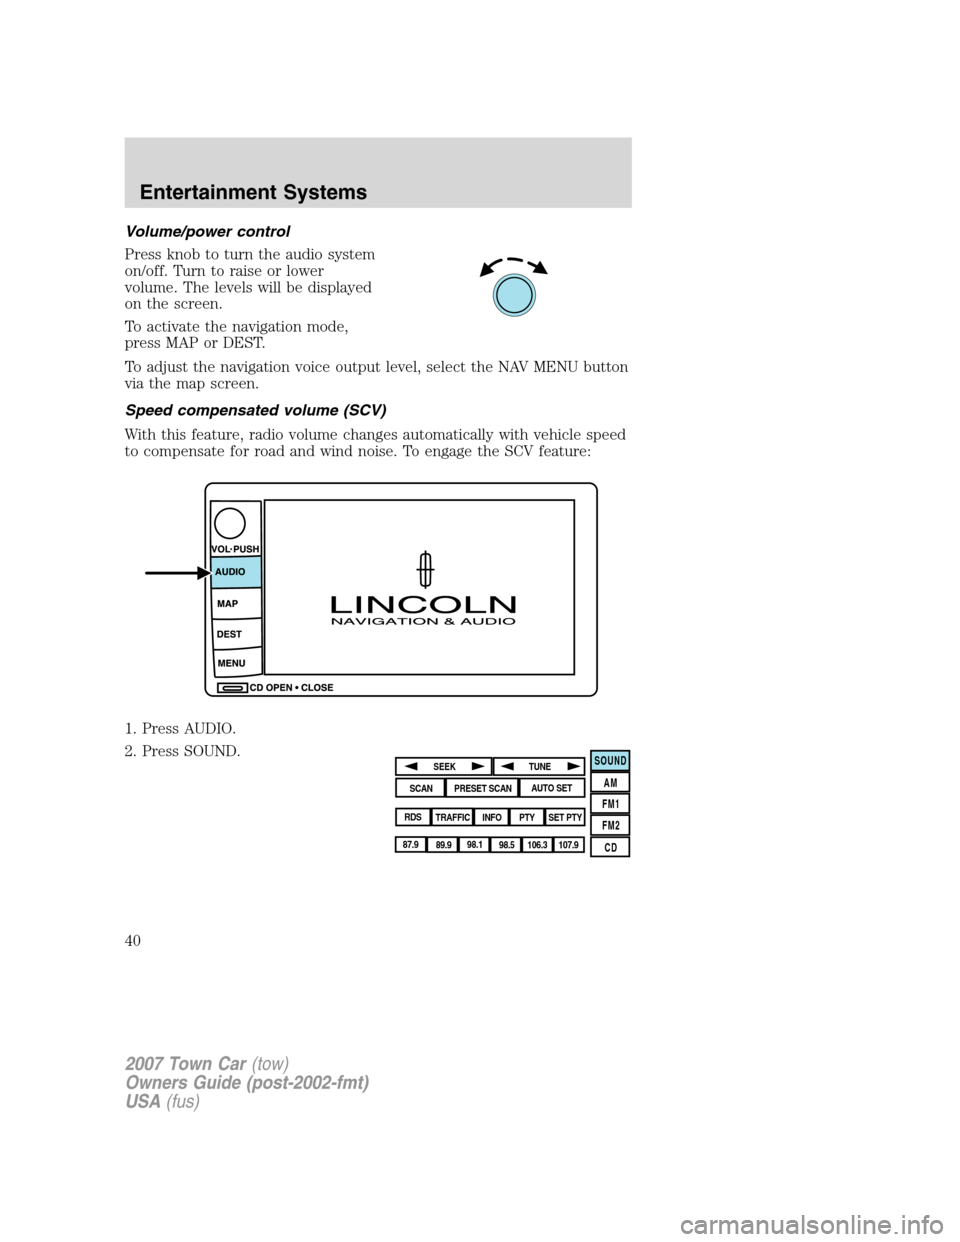 LINCOLN TOWN CAR 2007  Owners Manual Volume/power control
Press knob to turn the audio system
on/off. Turn to raise or lower
volume. The levels will be displayed
on the screen.
To activate the navigation mode,
press MAP or DEST.
To adjus